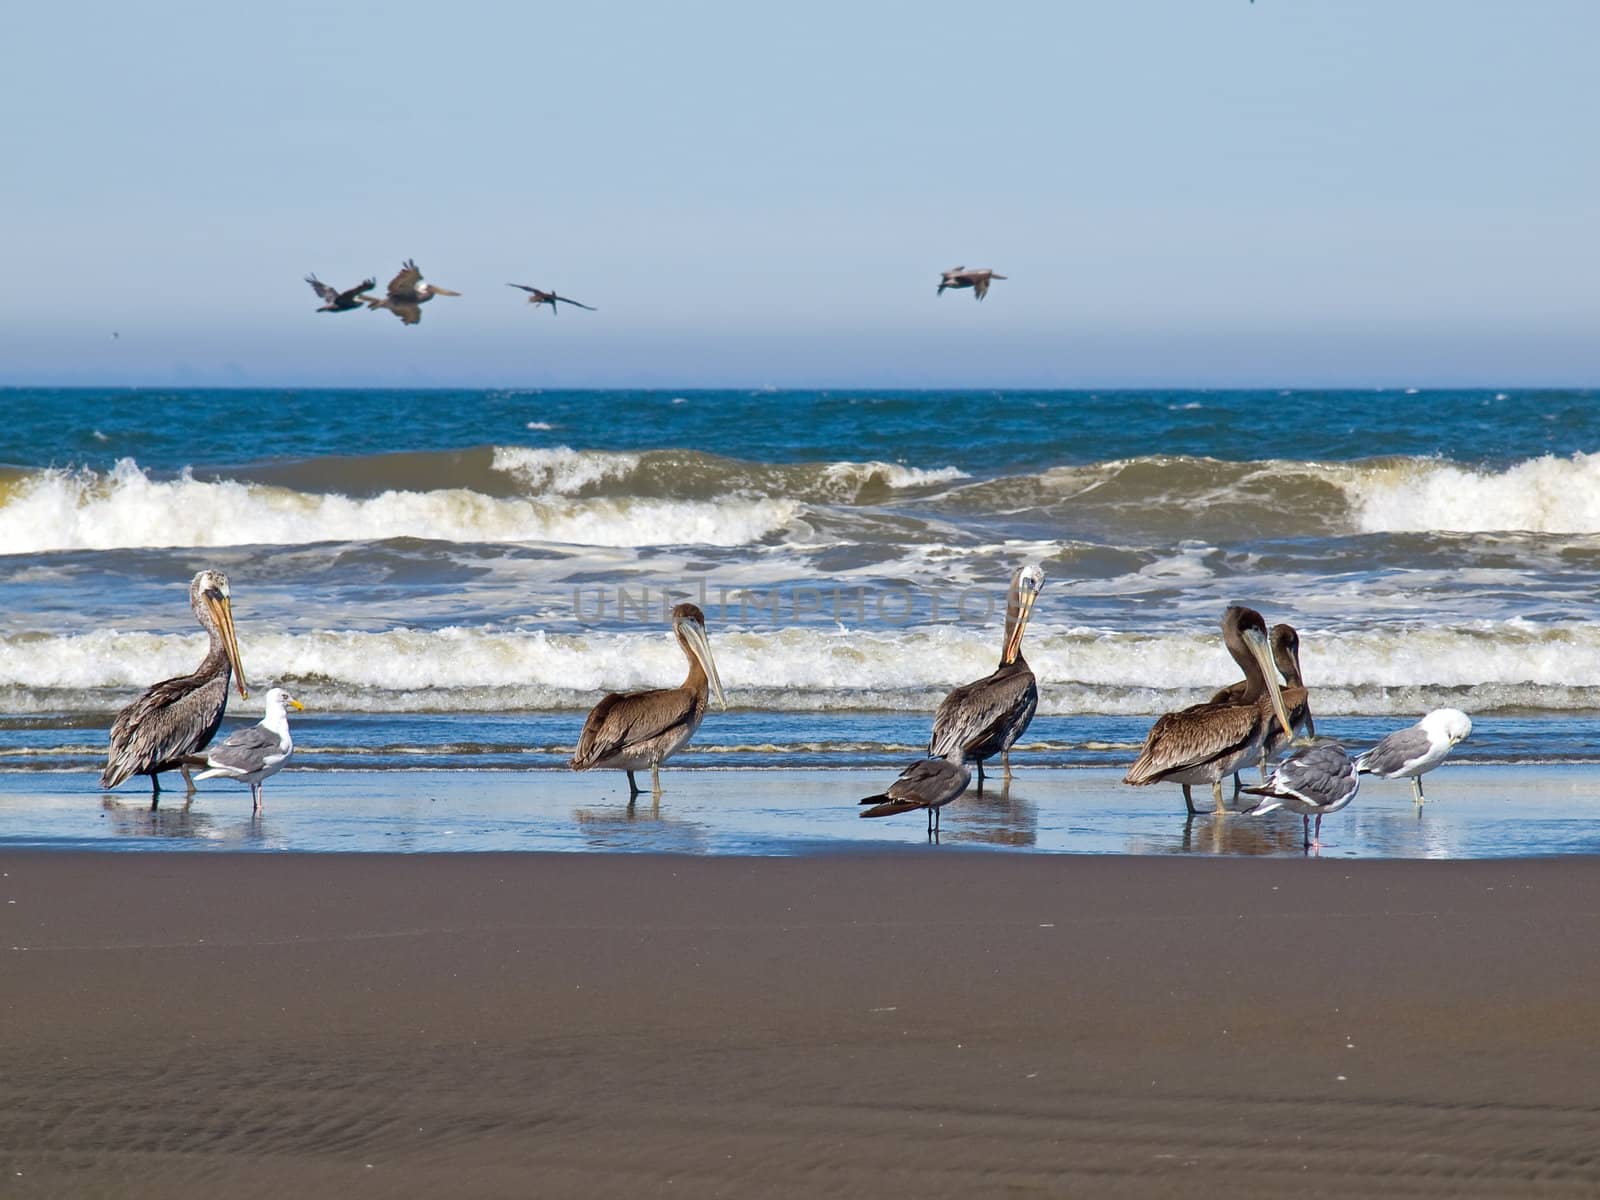 A Variety of Seabirds at the Seashore Featuring Pelicans by Frankljunior